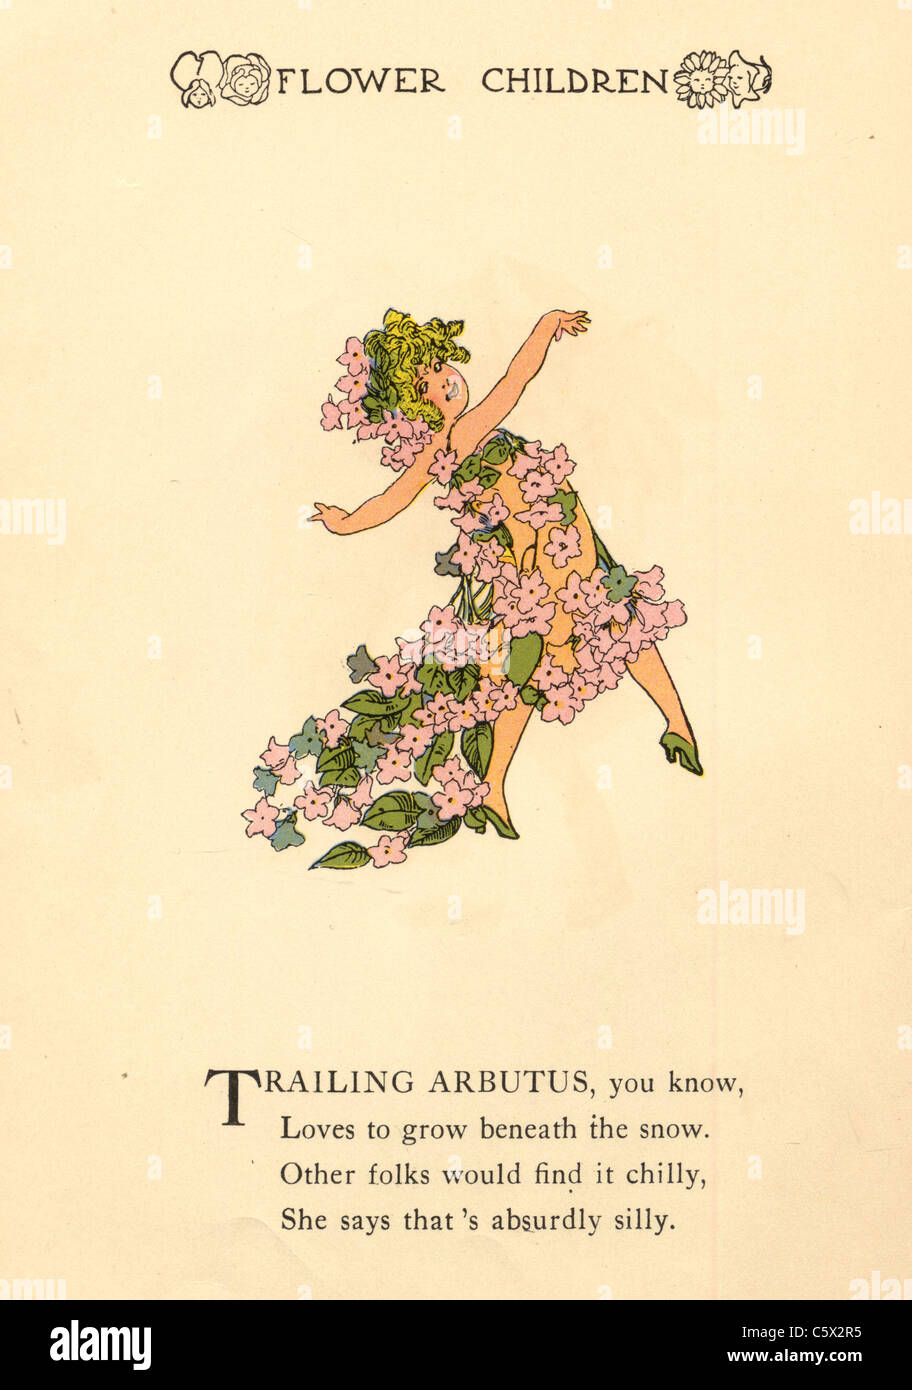 Trailing Arbutus - Flower Child Illustration from an antiquarian book Stock Photo